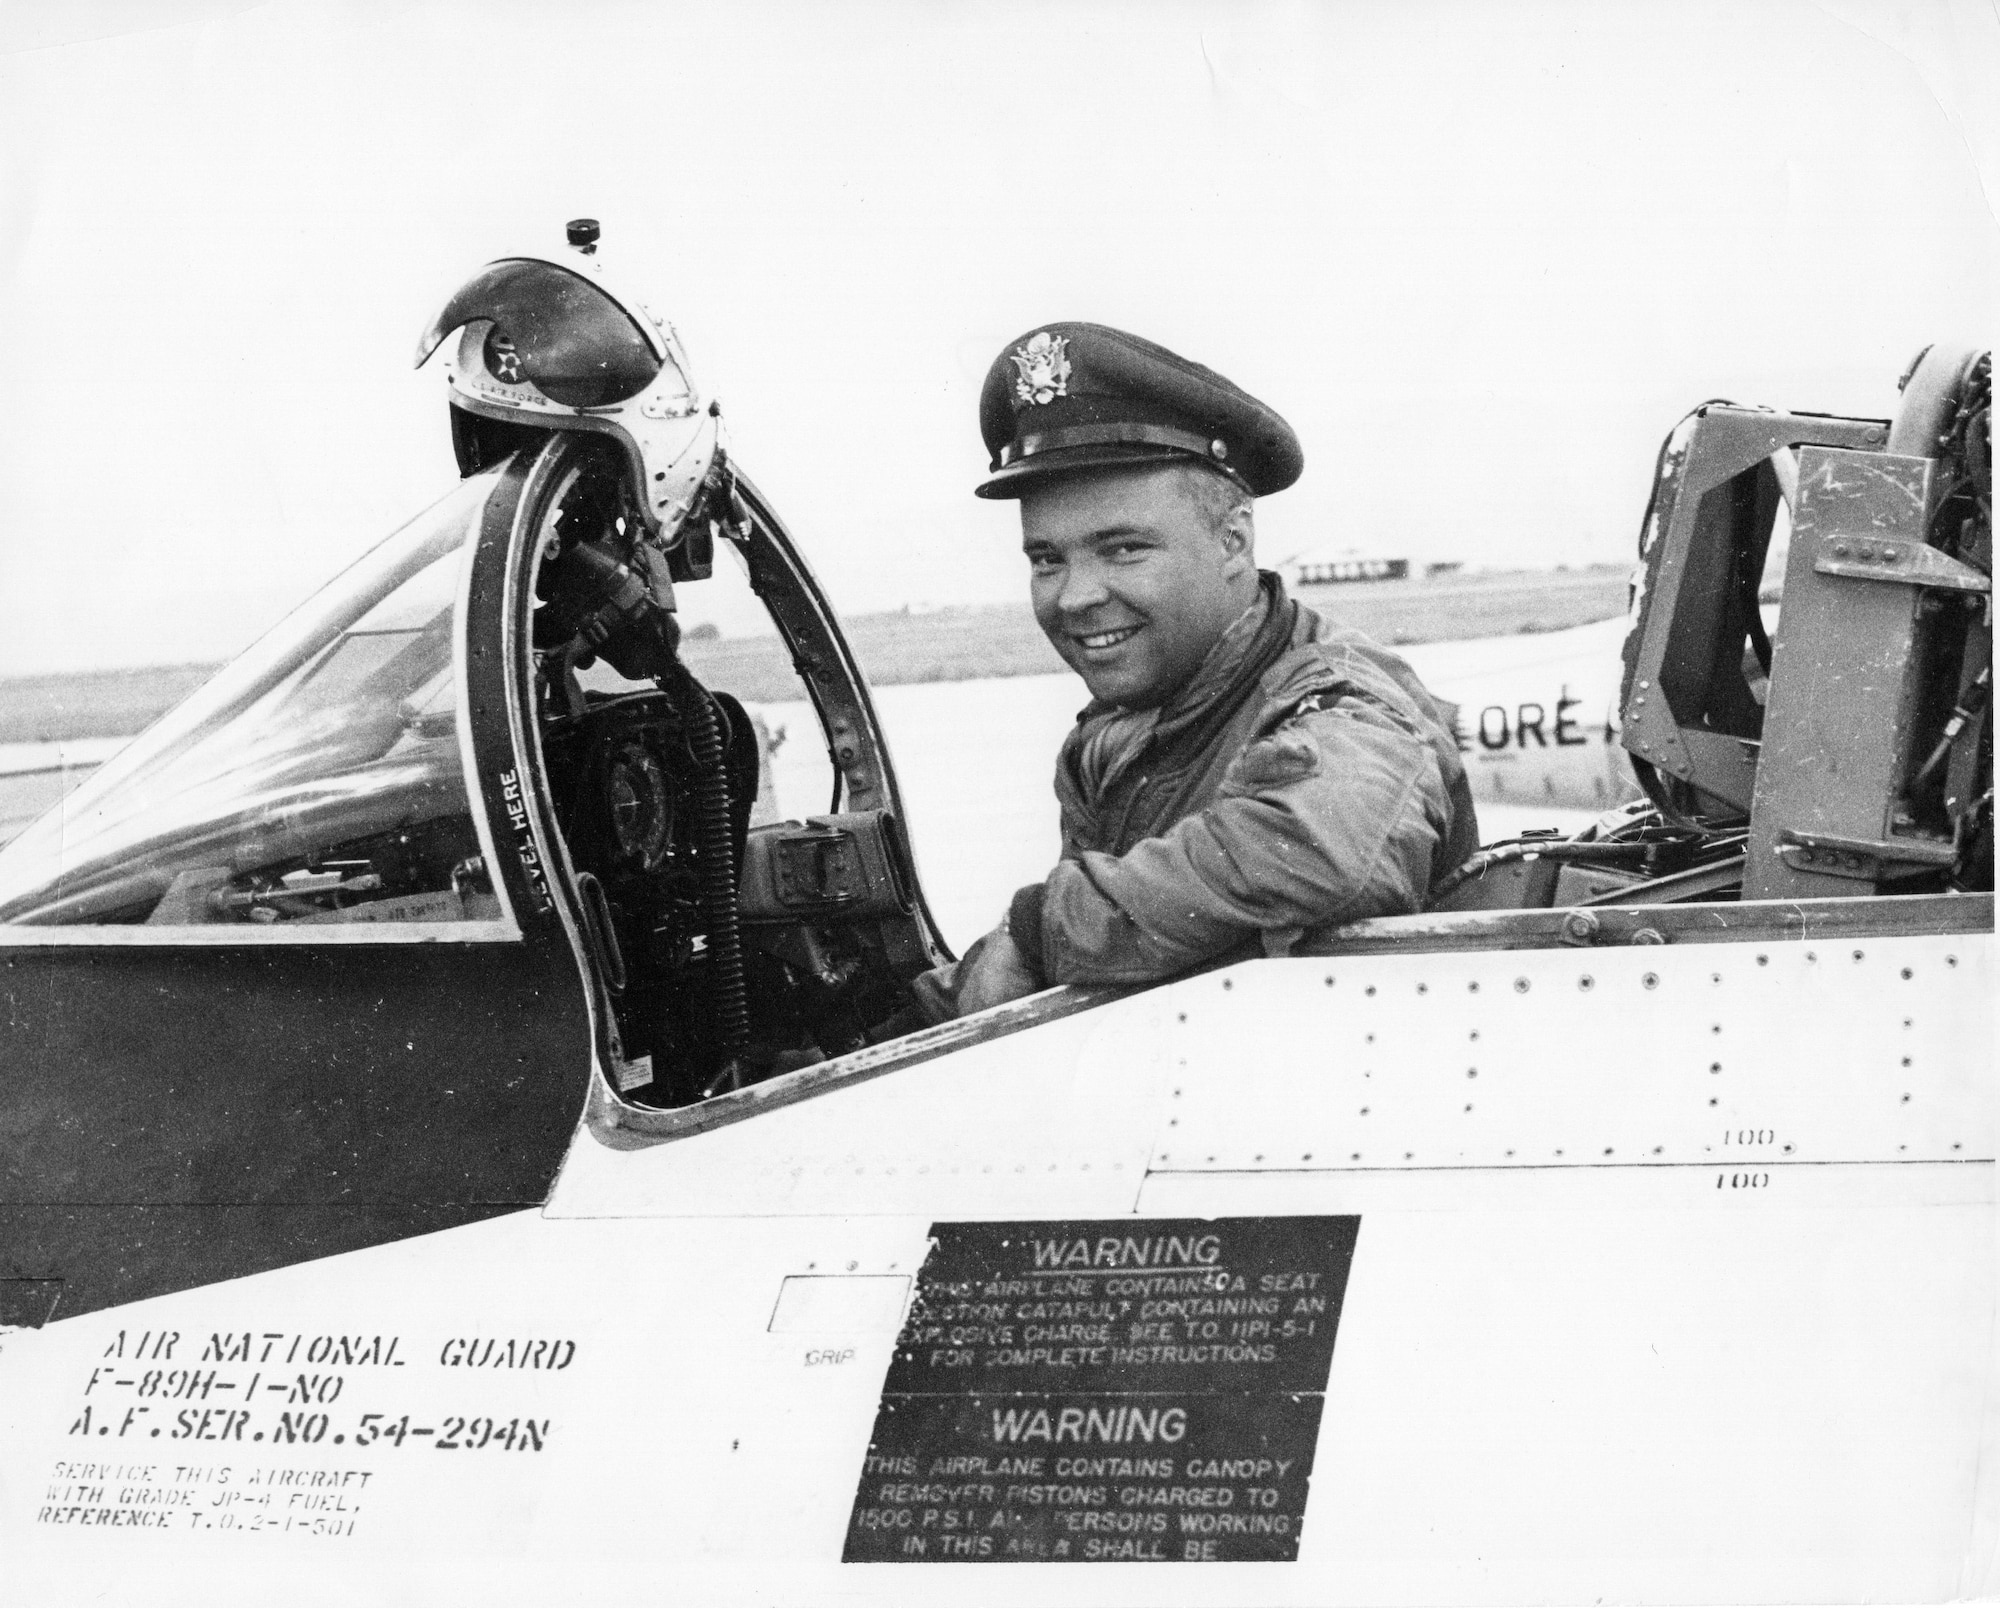 Walter W. “Wally” Fellman, Jr., smiles as he sits in the cockpit of an OreANG Northrop F-89H Scorpion fighter-interceptor in the late 1950s.  Fellman flew the North American F-86 Sabre fighter in combat during the Korean War.